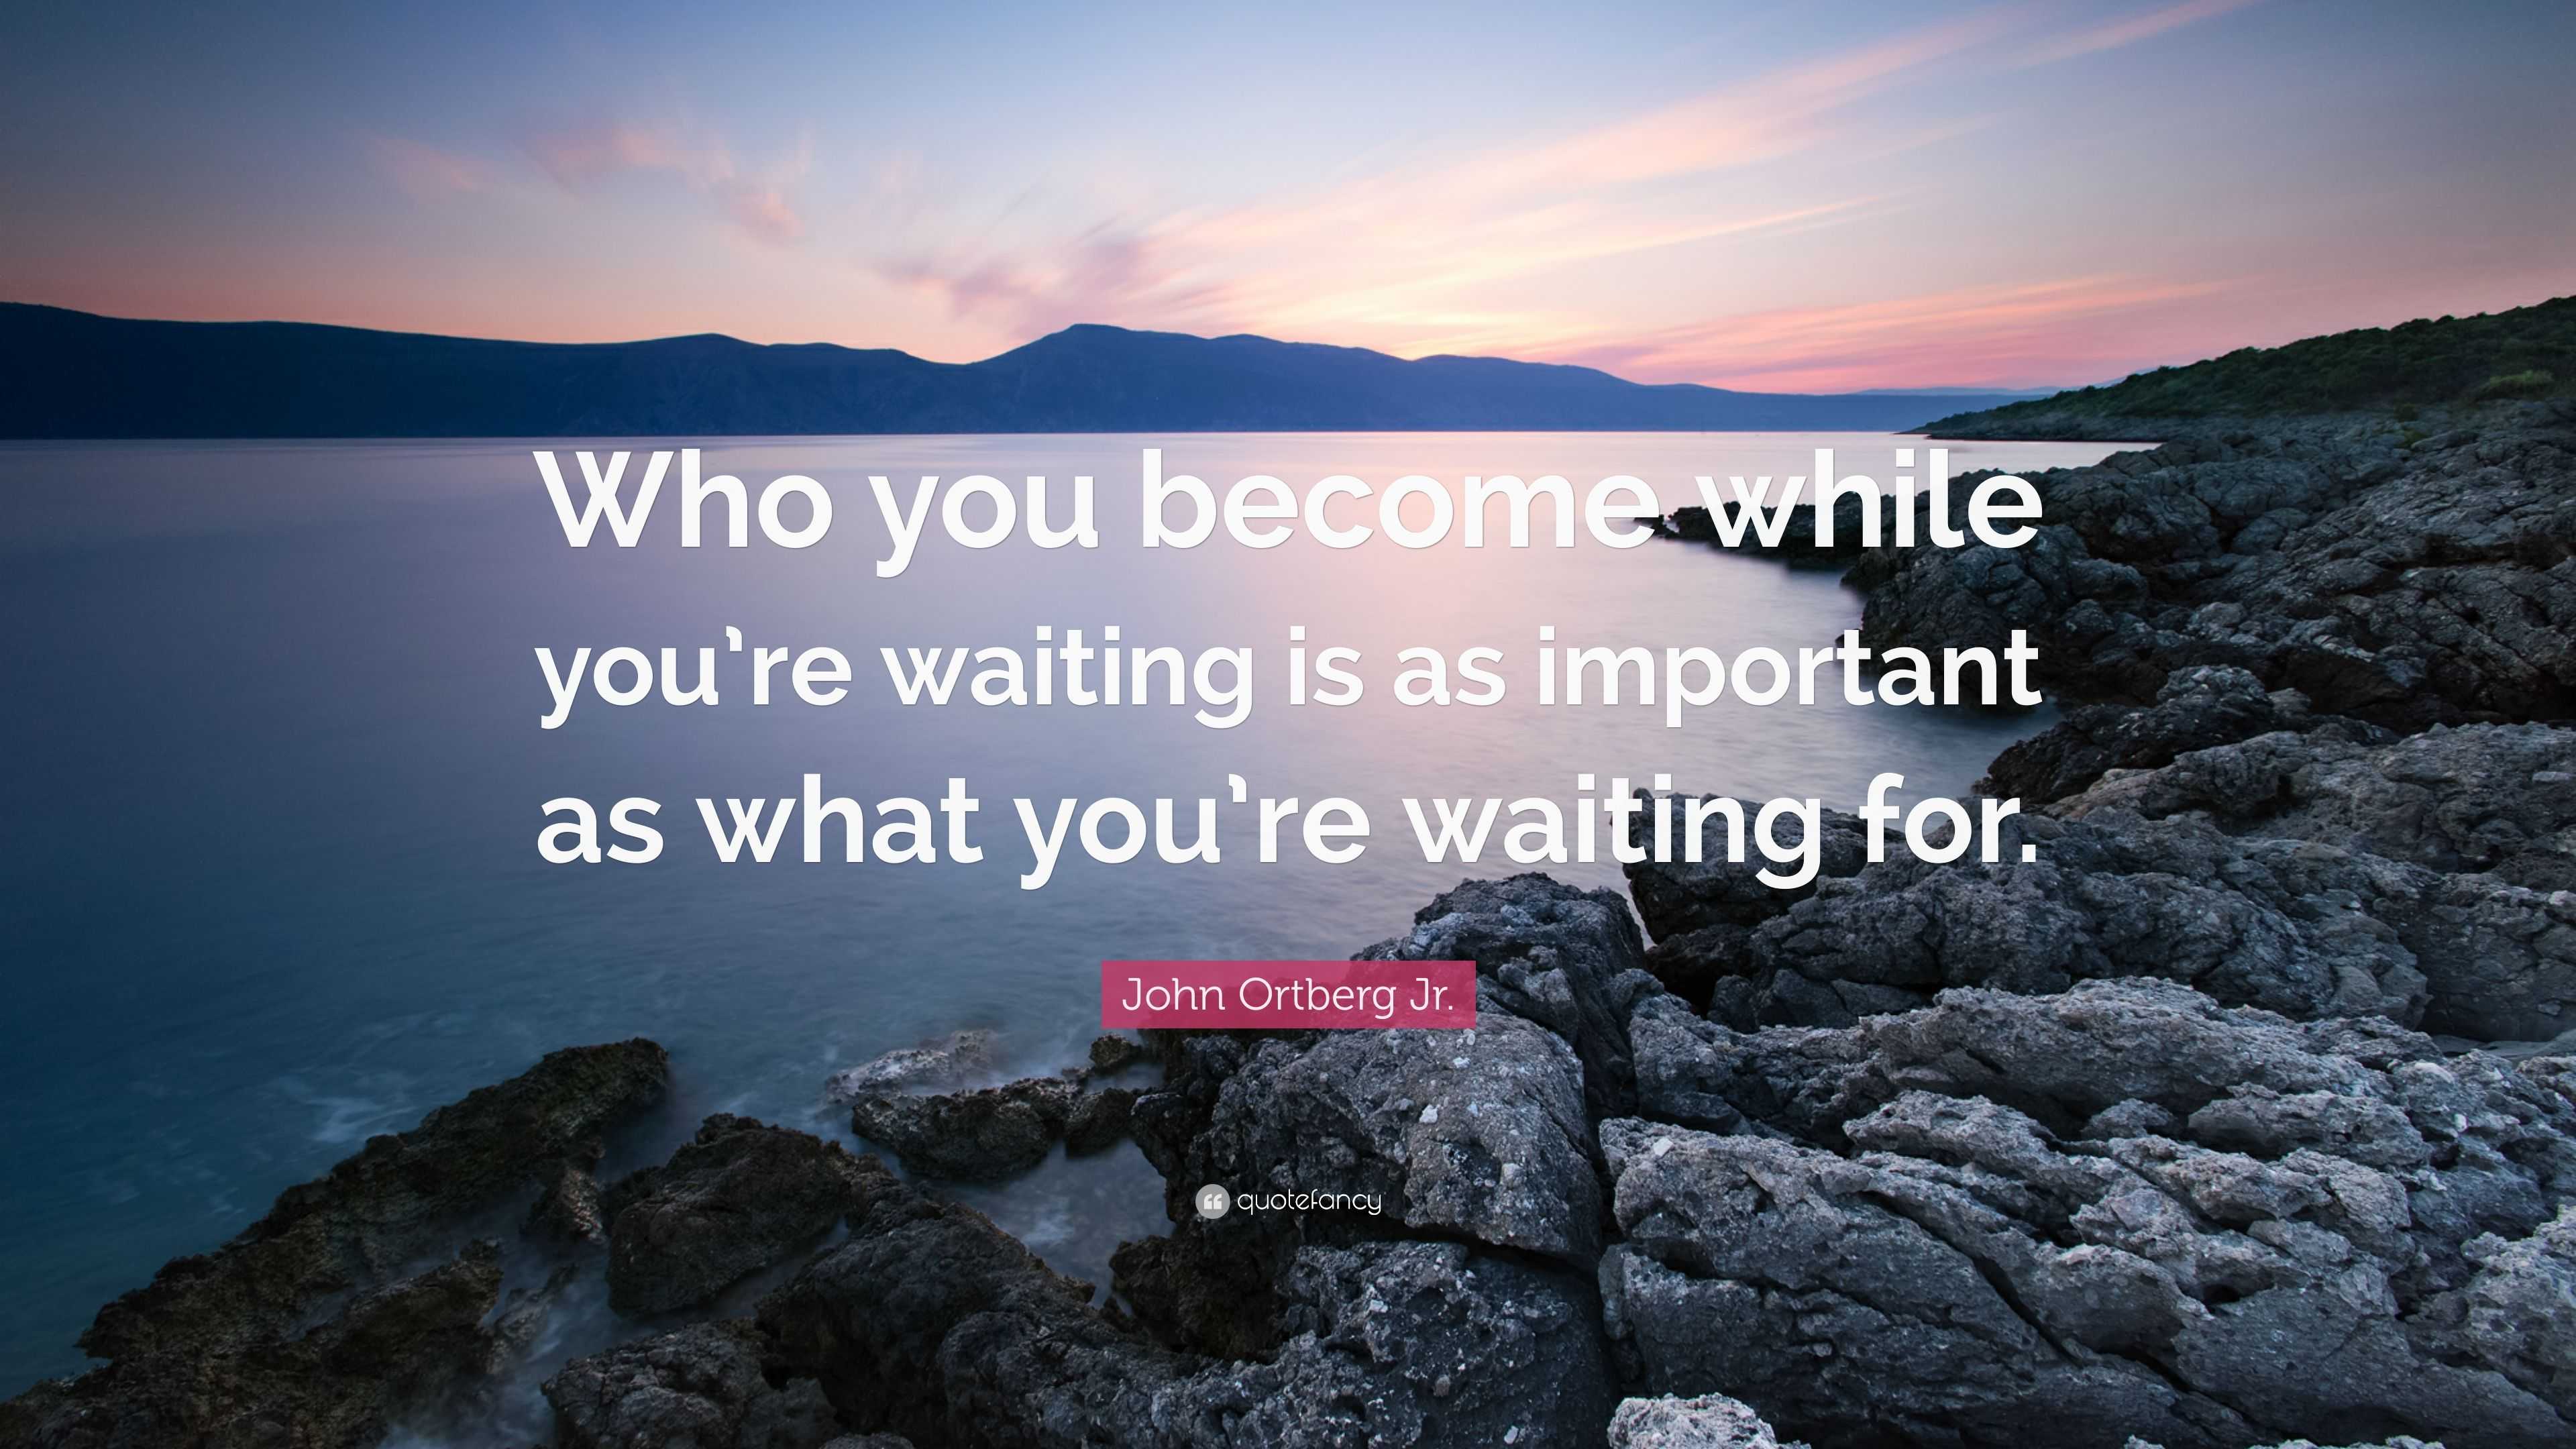 John Ortberg Jr. Quote: “Who you become while you’re waiting is as